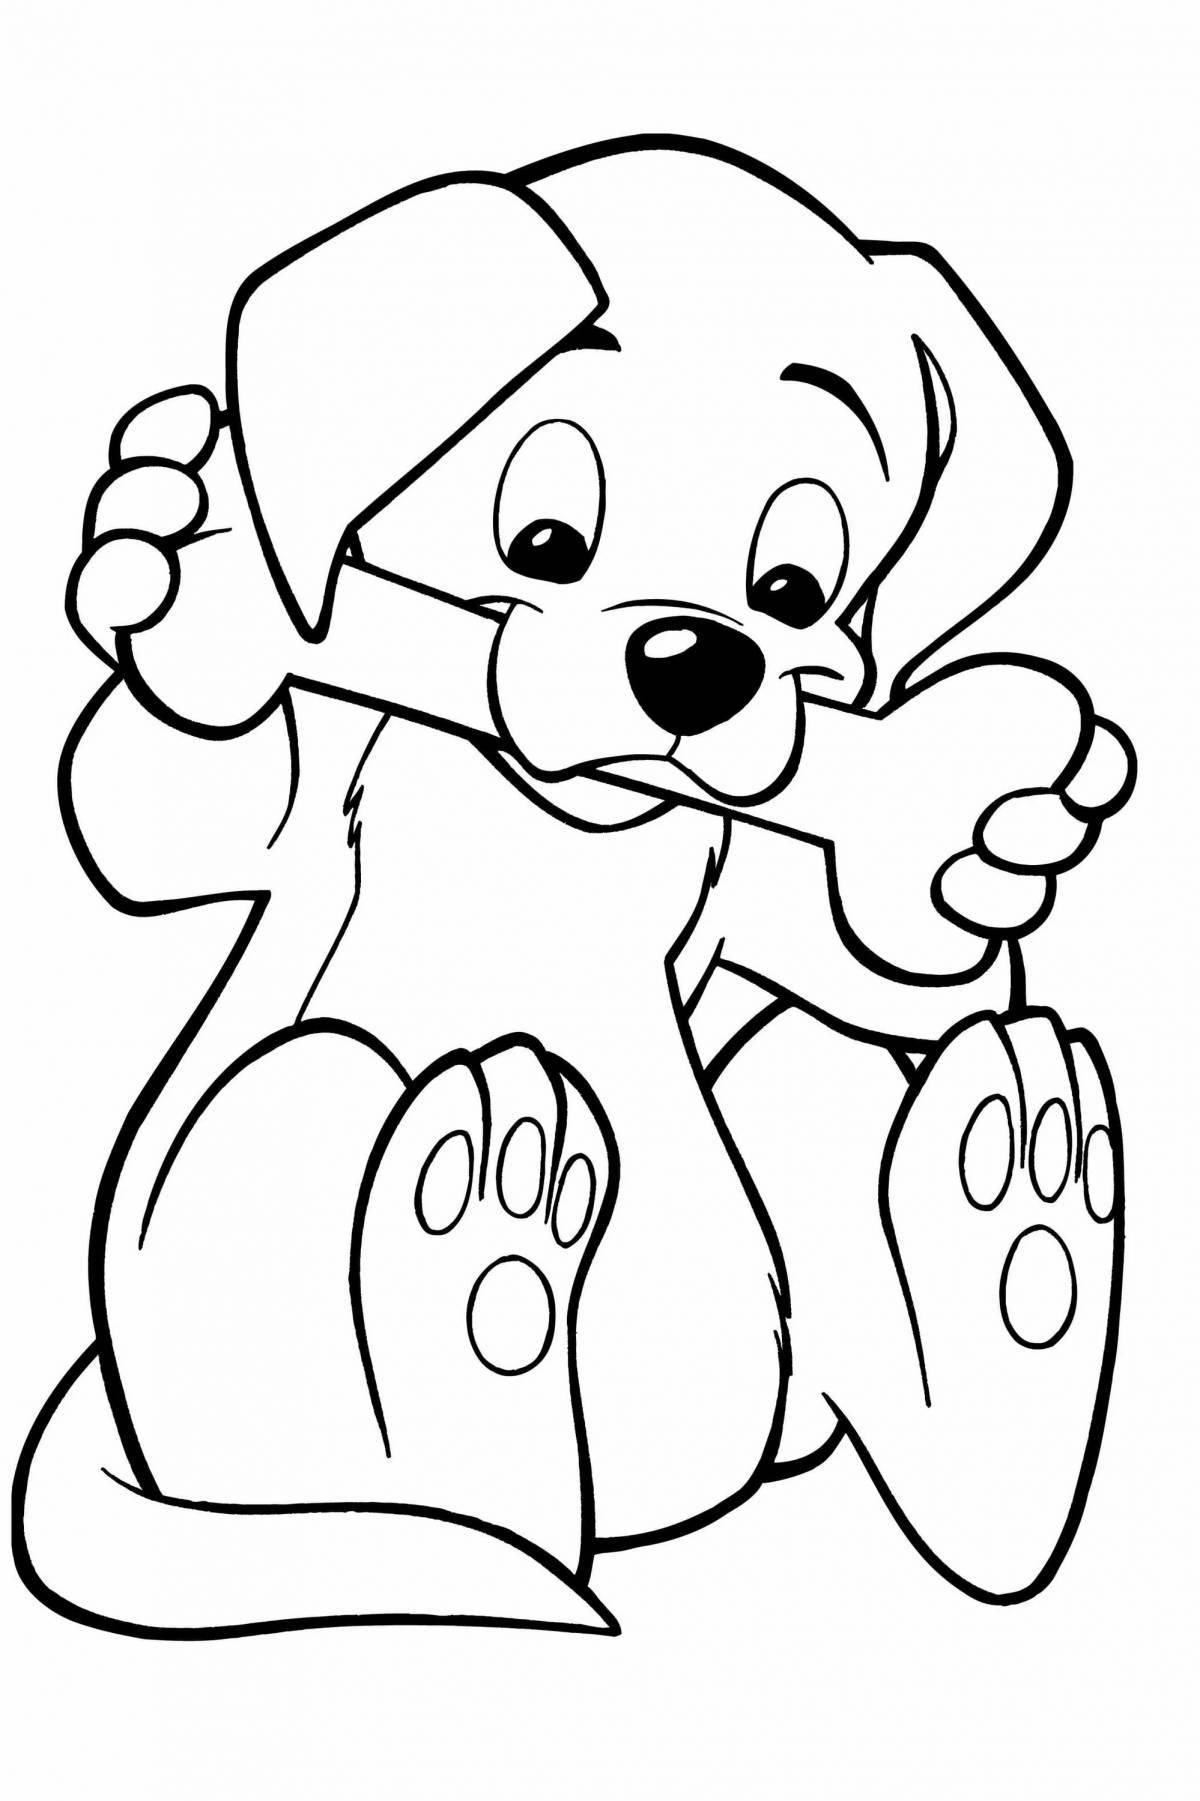 Incredible dog coloring book for kids